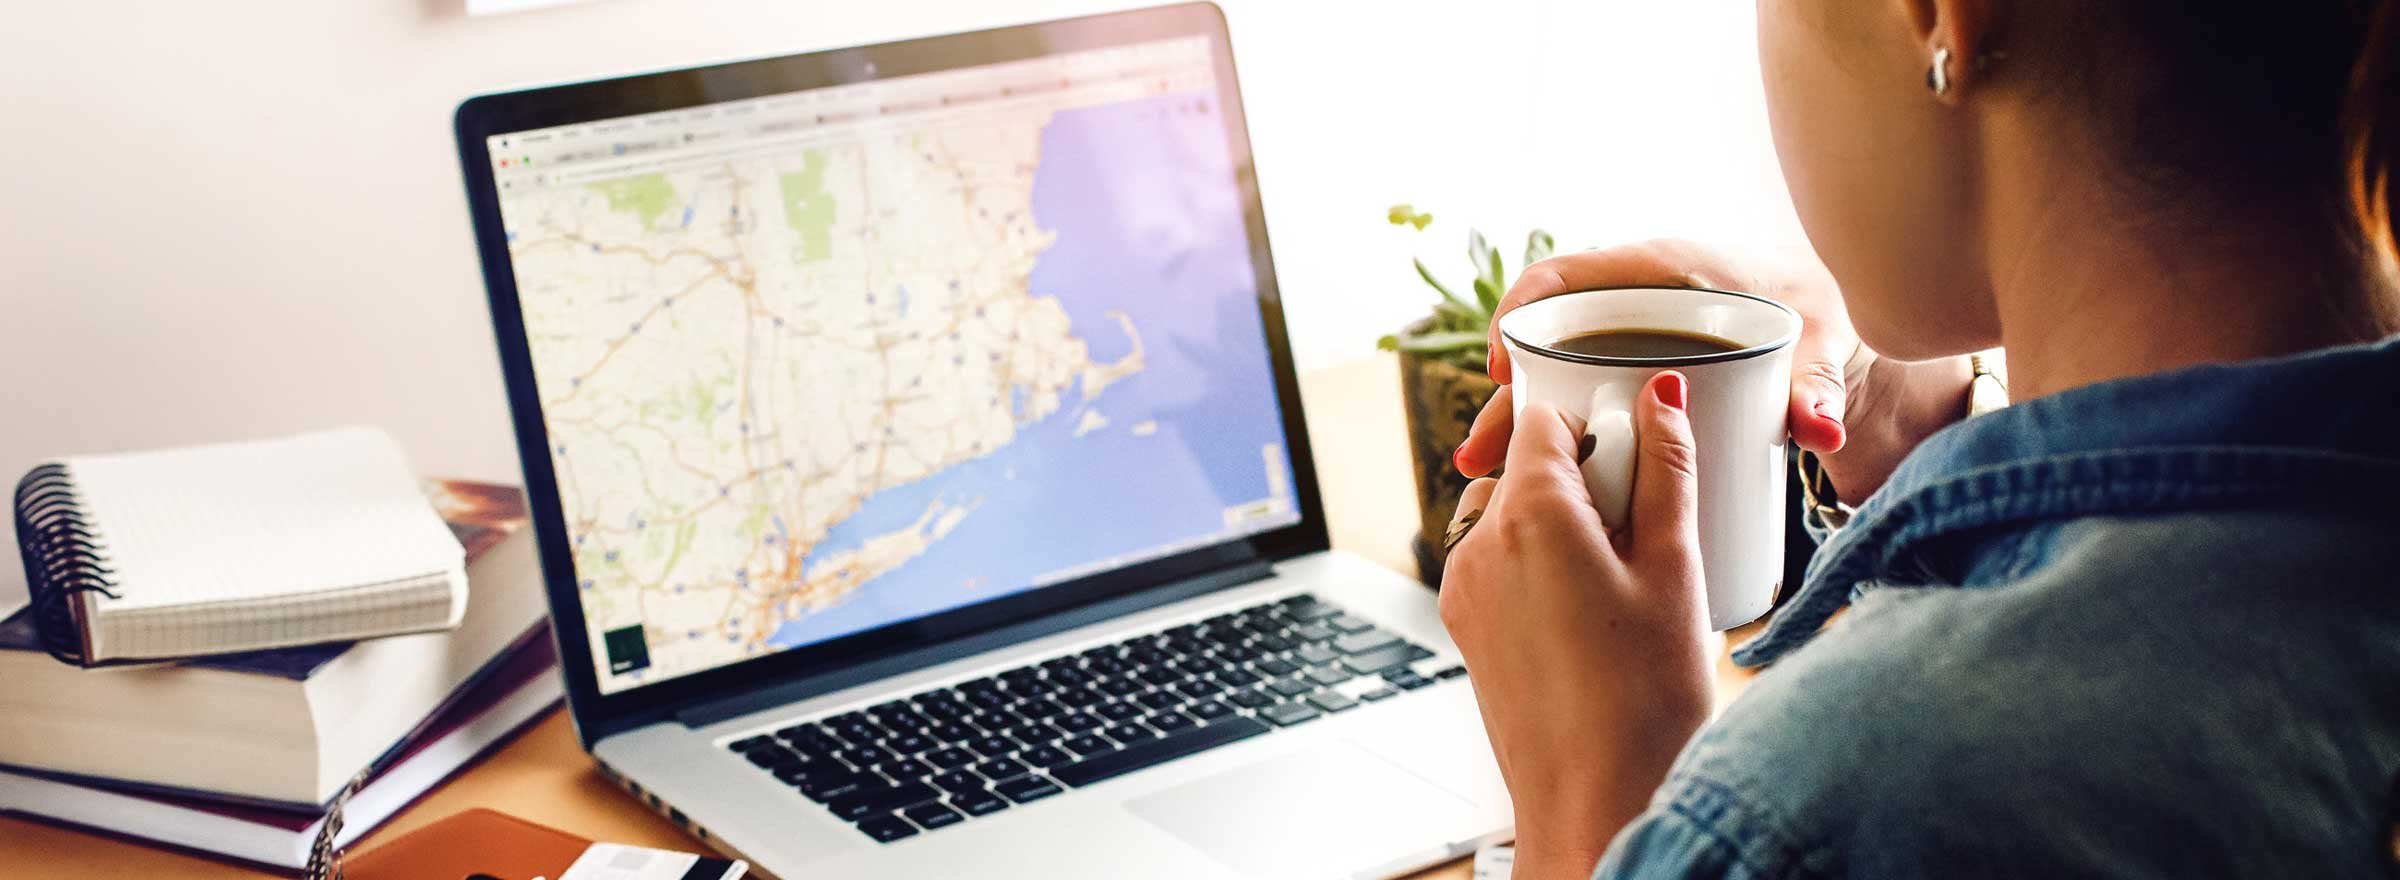 woman drinking coffee and looking at a map of the northeast US on a computer screen